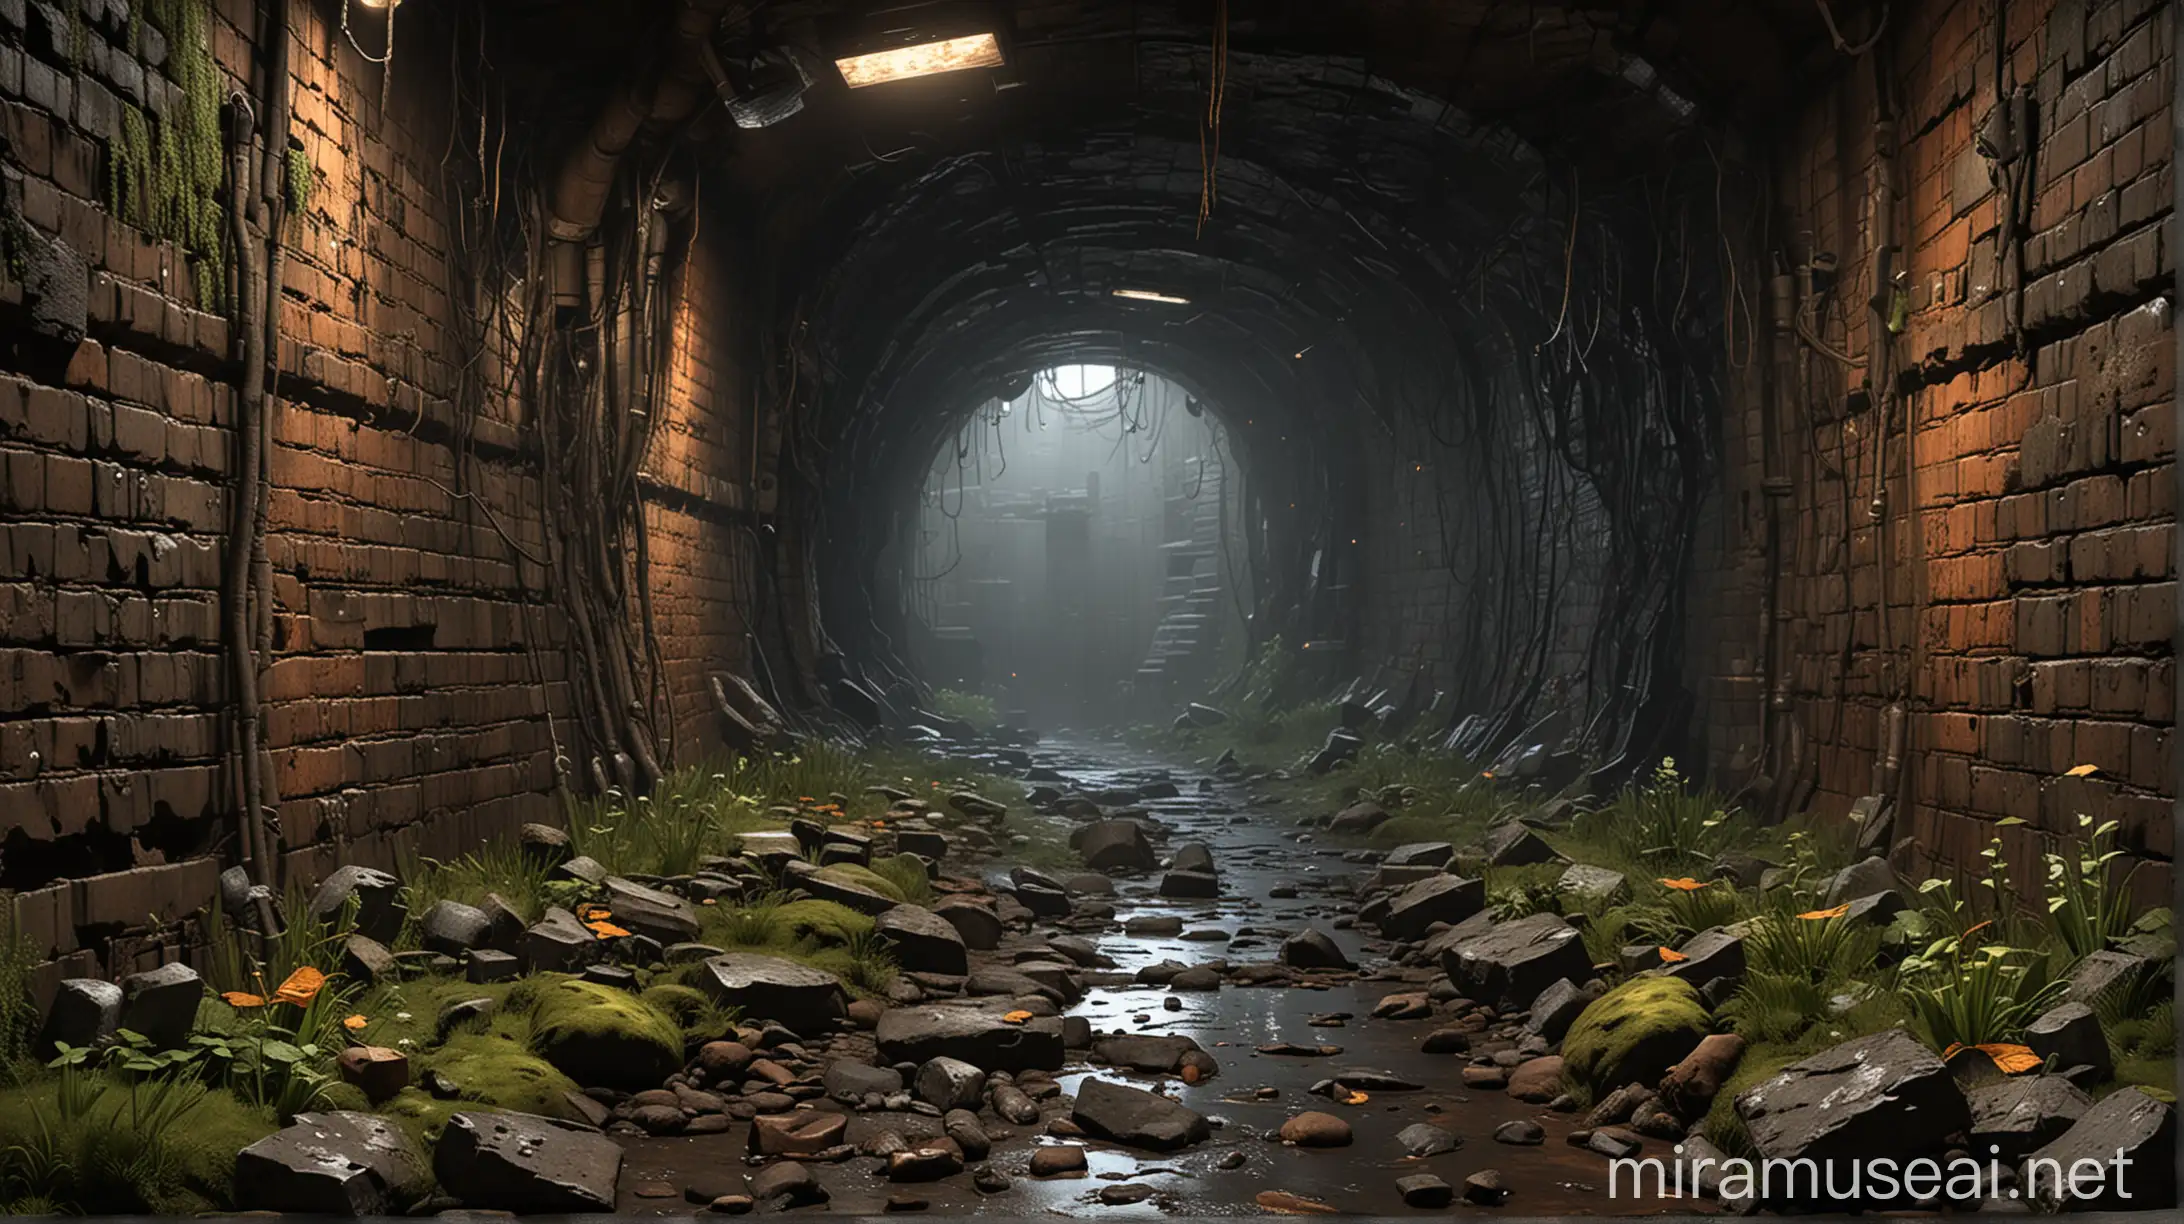 PostApocalyptic Tunnel Wall with Worn Bricks and Rusted Pipes